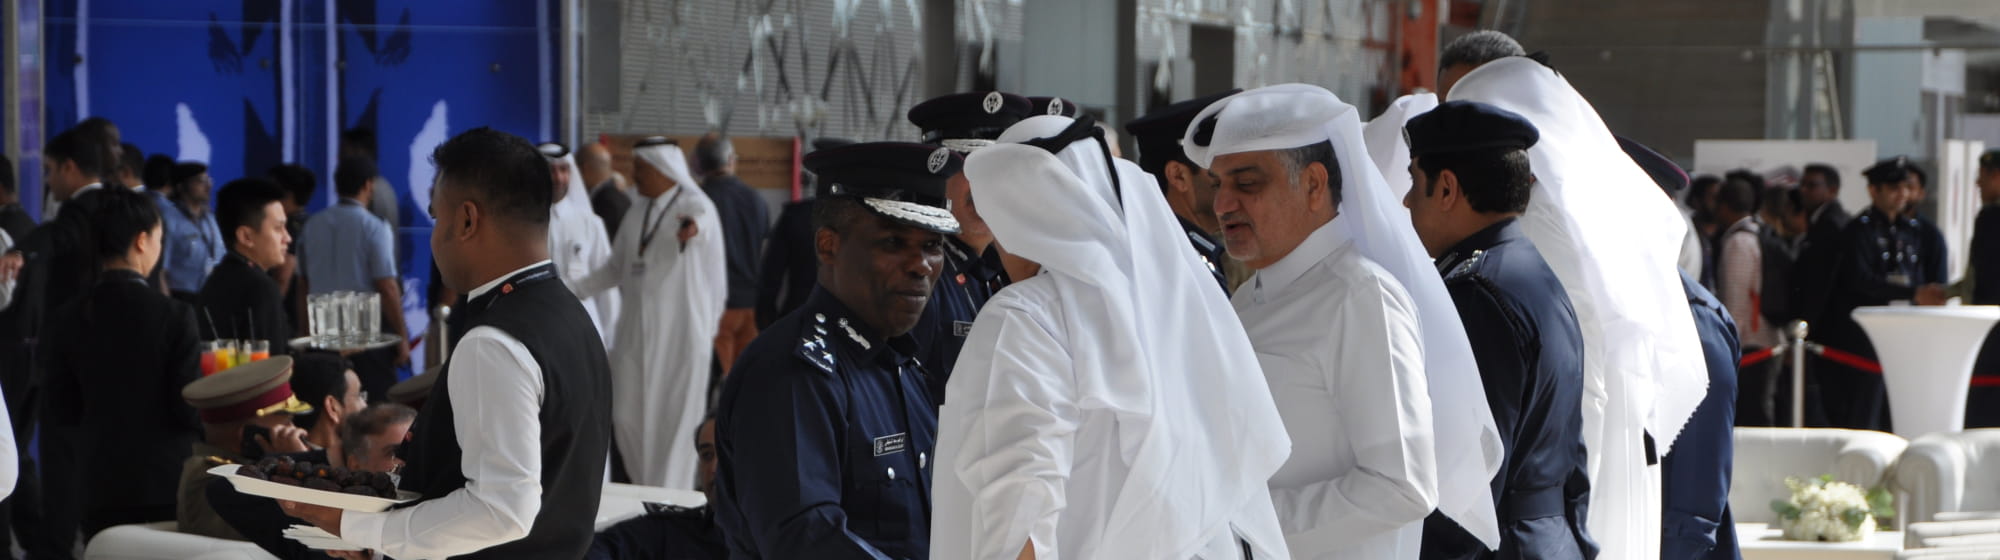 Visitors and official delegations attending Milipol Qatar, the interantional event for homeland security and civil defence in the Middle East